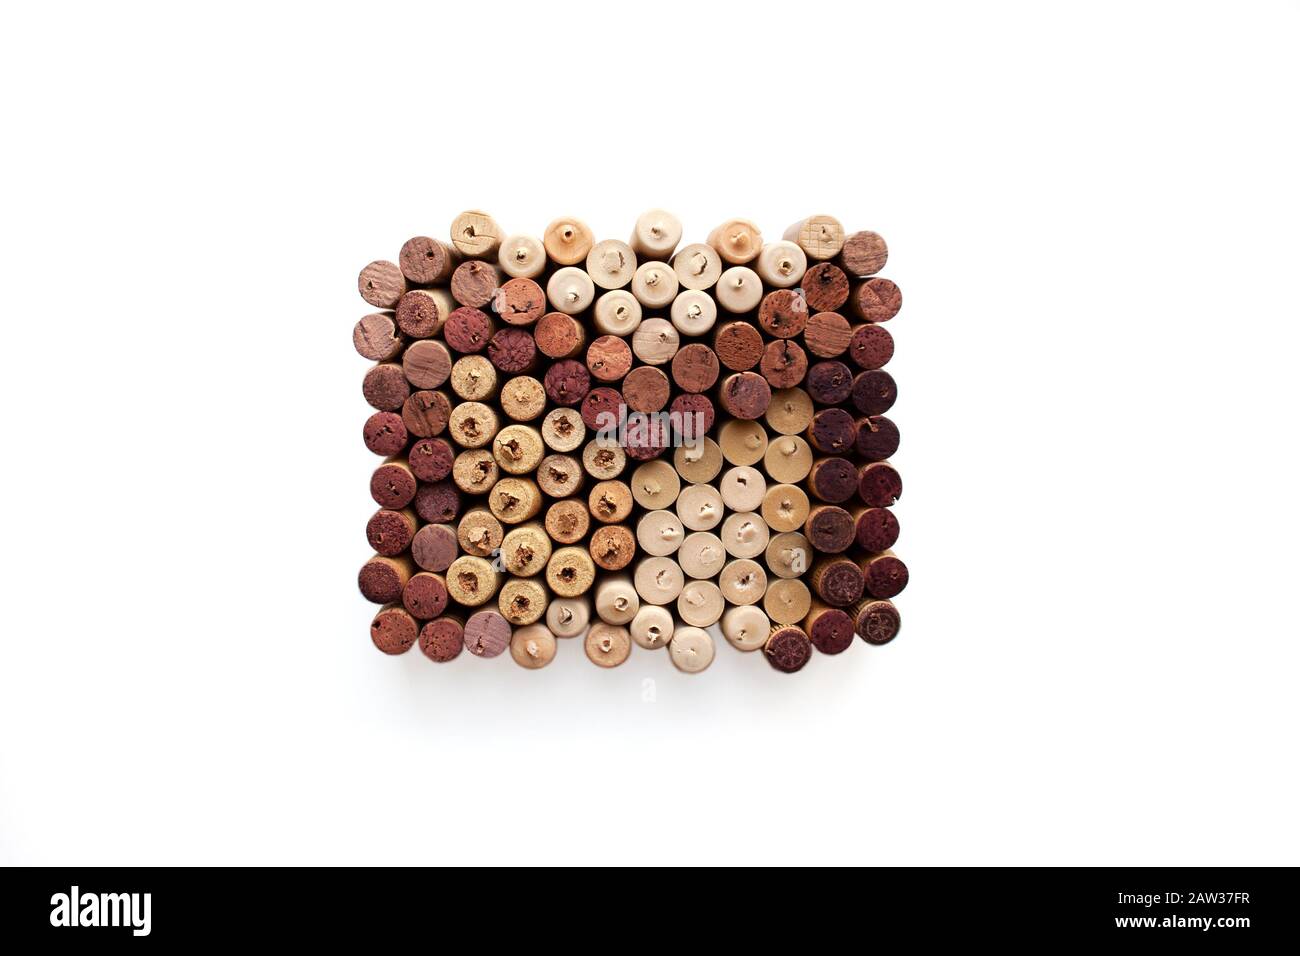 Wine corks envelope composition isolated on white background from a high angle view Stock Photo